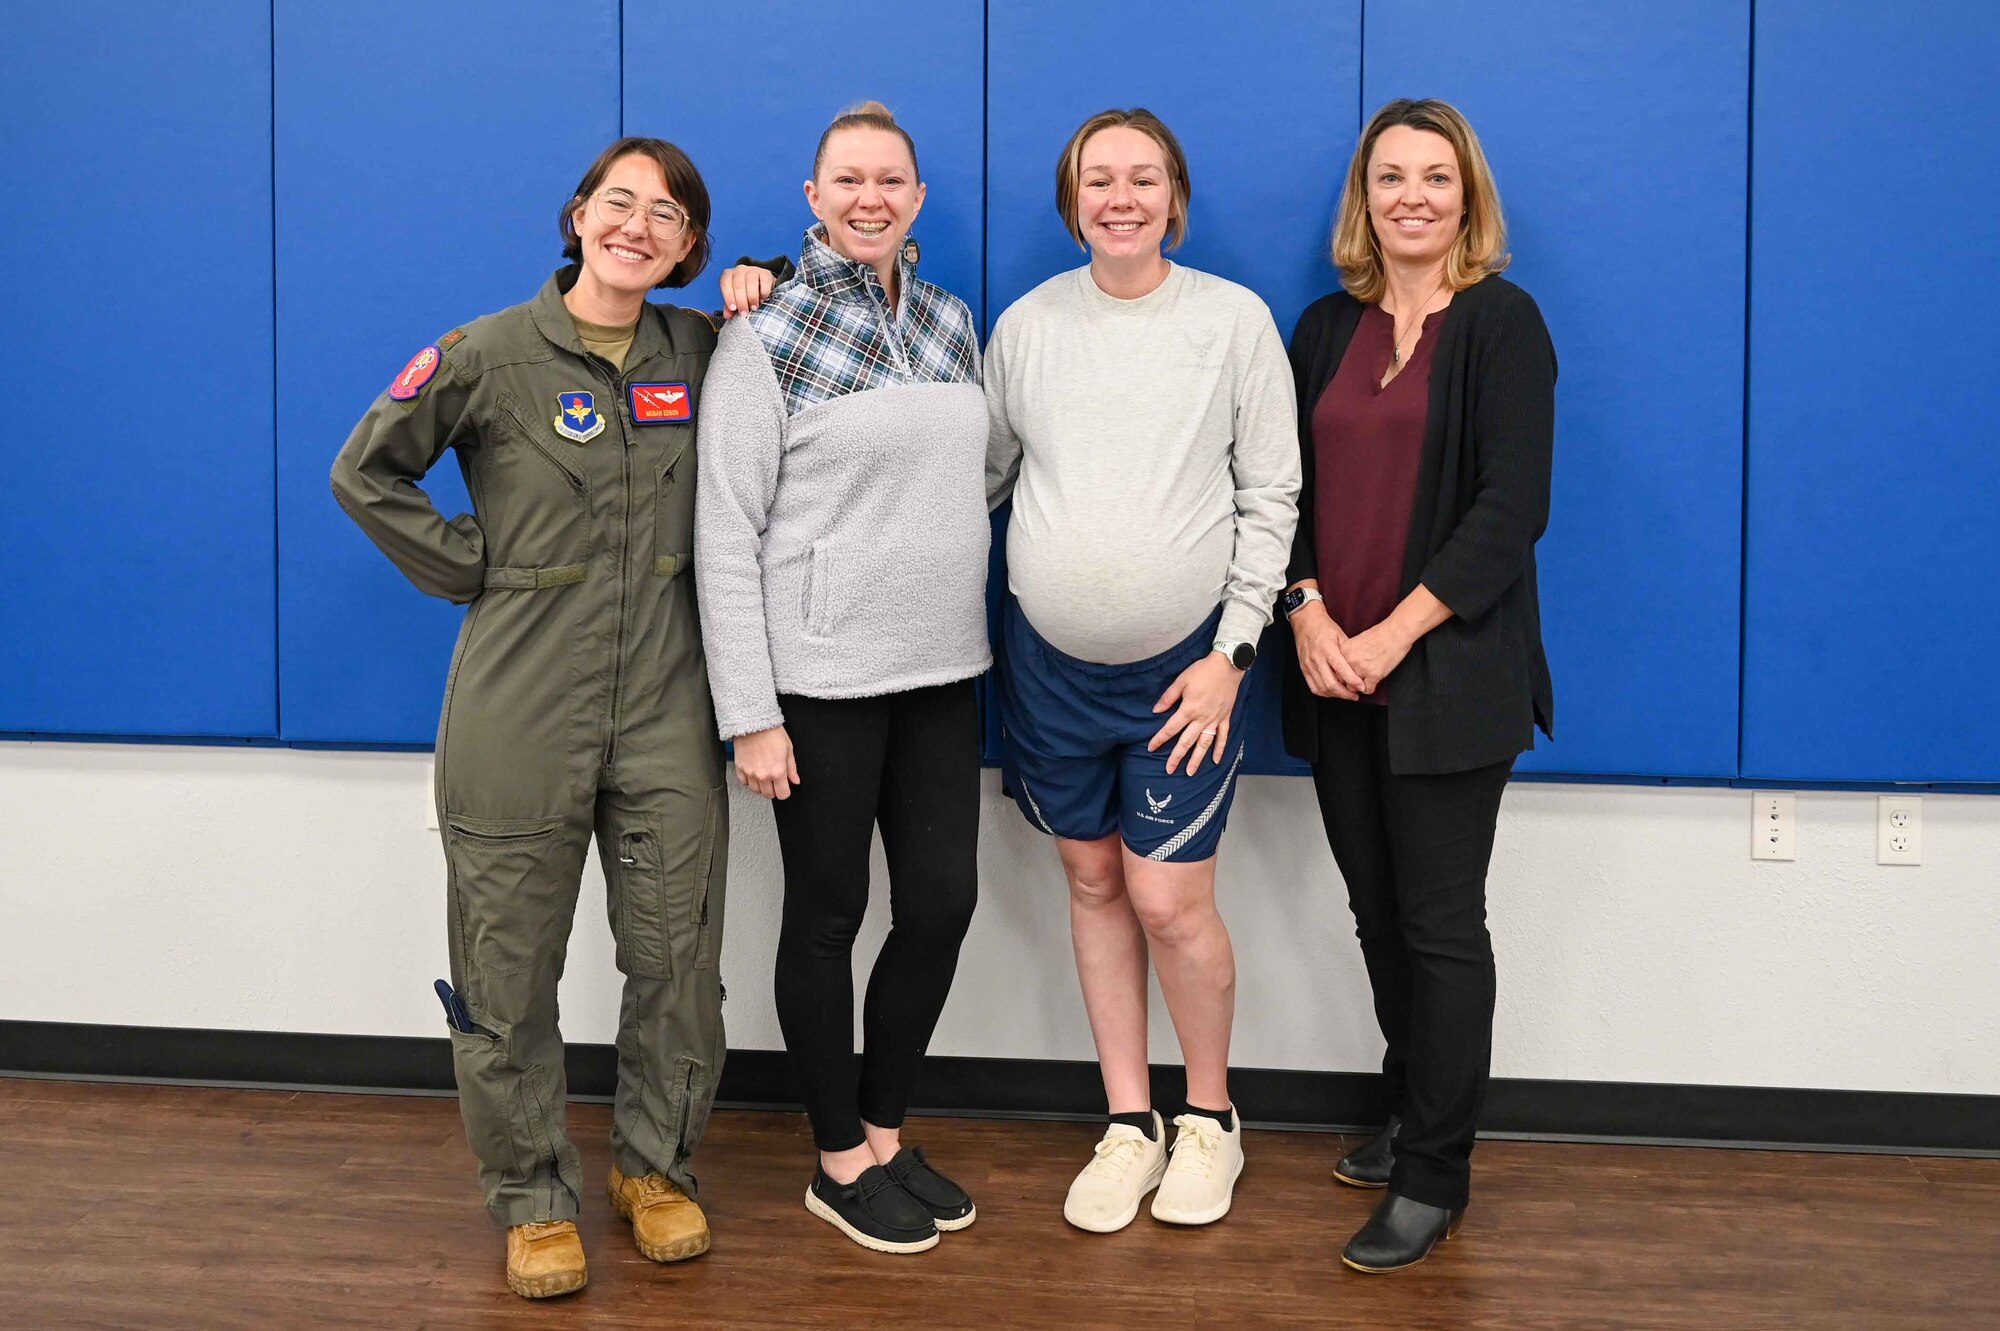 The organizers of Coffee and Connect pose for a photo after the Women’s History Month panel at Altus Air Force Base, Oklahoma, March 6, 2024. Coffee and Connect meets on the first Wednesday of every month. (U.S. Air Force photo by Airman 1st Class Kari Degraffenreed)